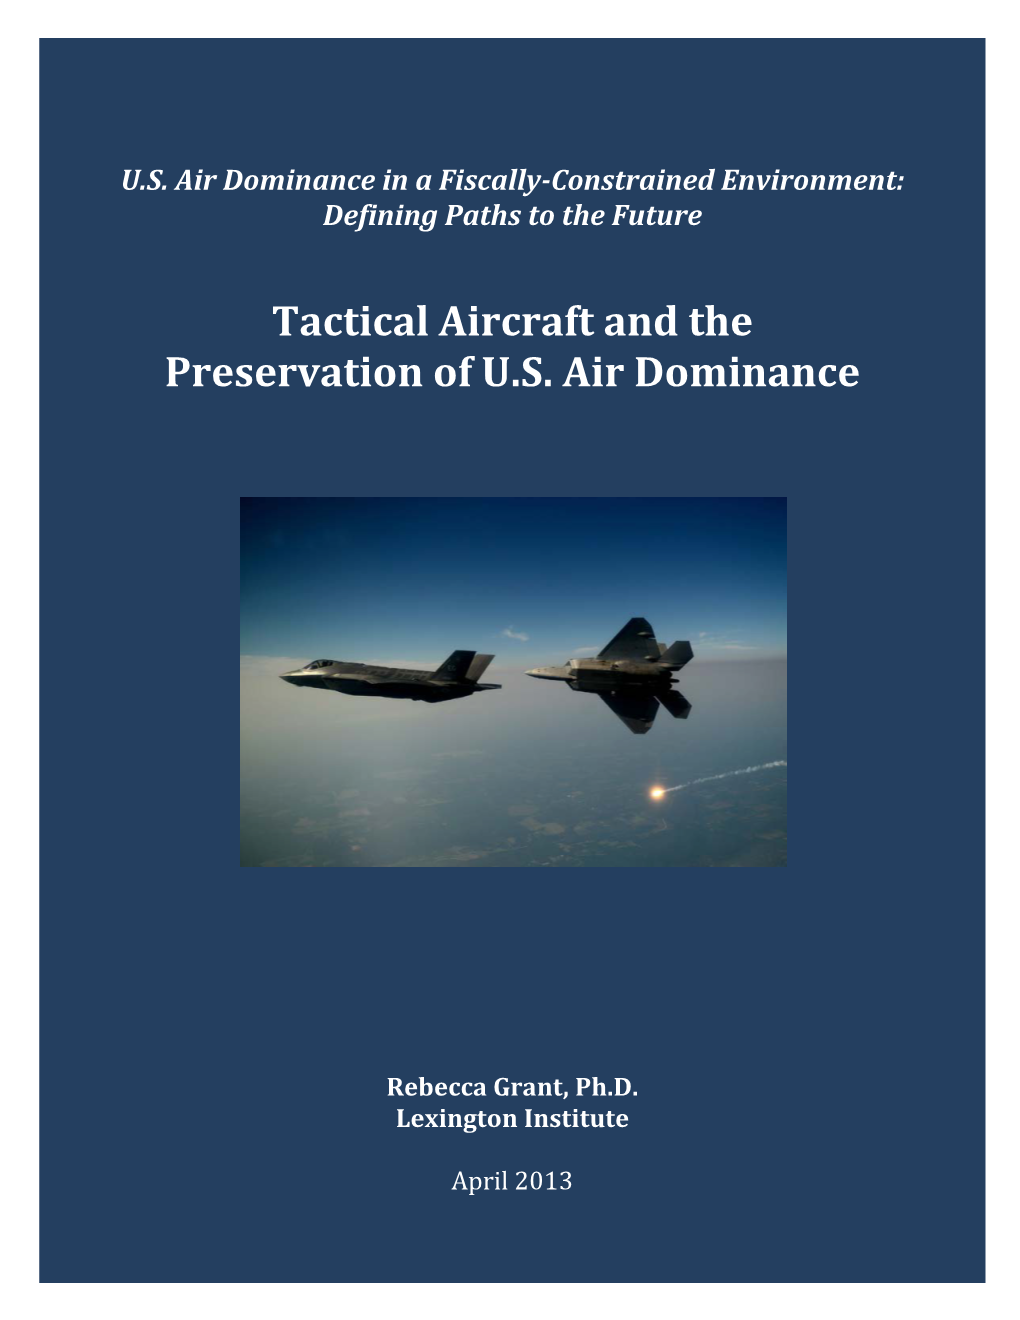 Tactical Aircraft and the Preservation of U.S. Air Dominance